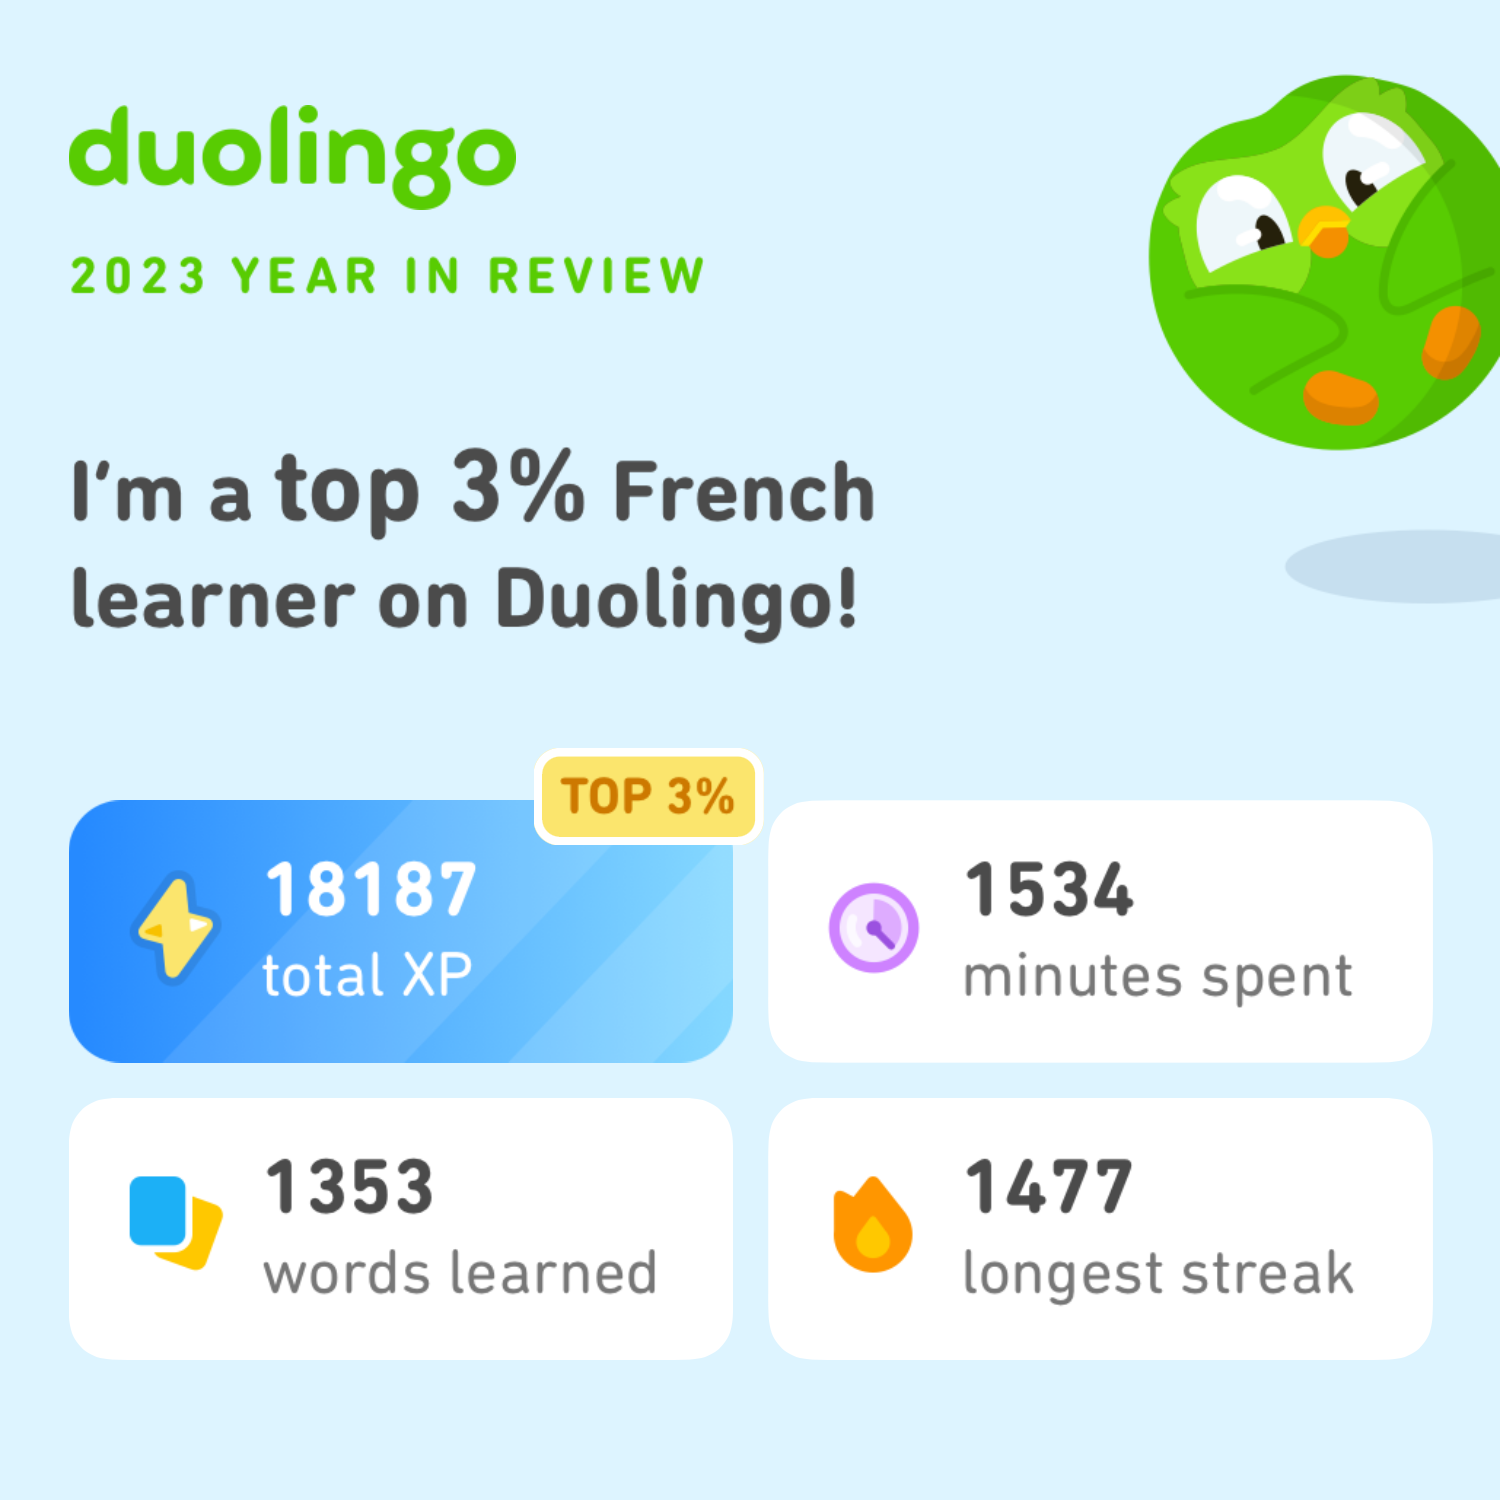 My Duolingo year in review. Apparently I’m I the top 3% of French learners, learnt 1353 words and spent 1534 minutes (25.5 hours) learning French.